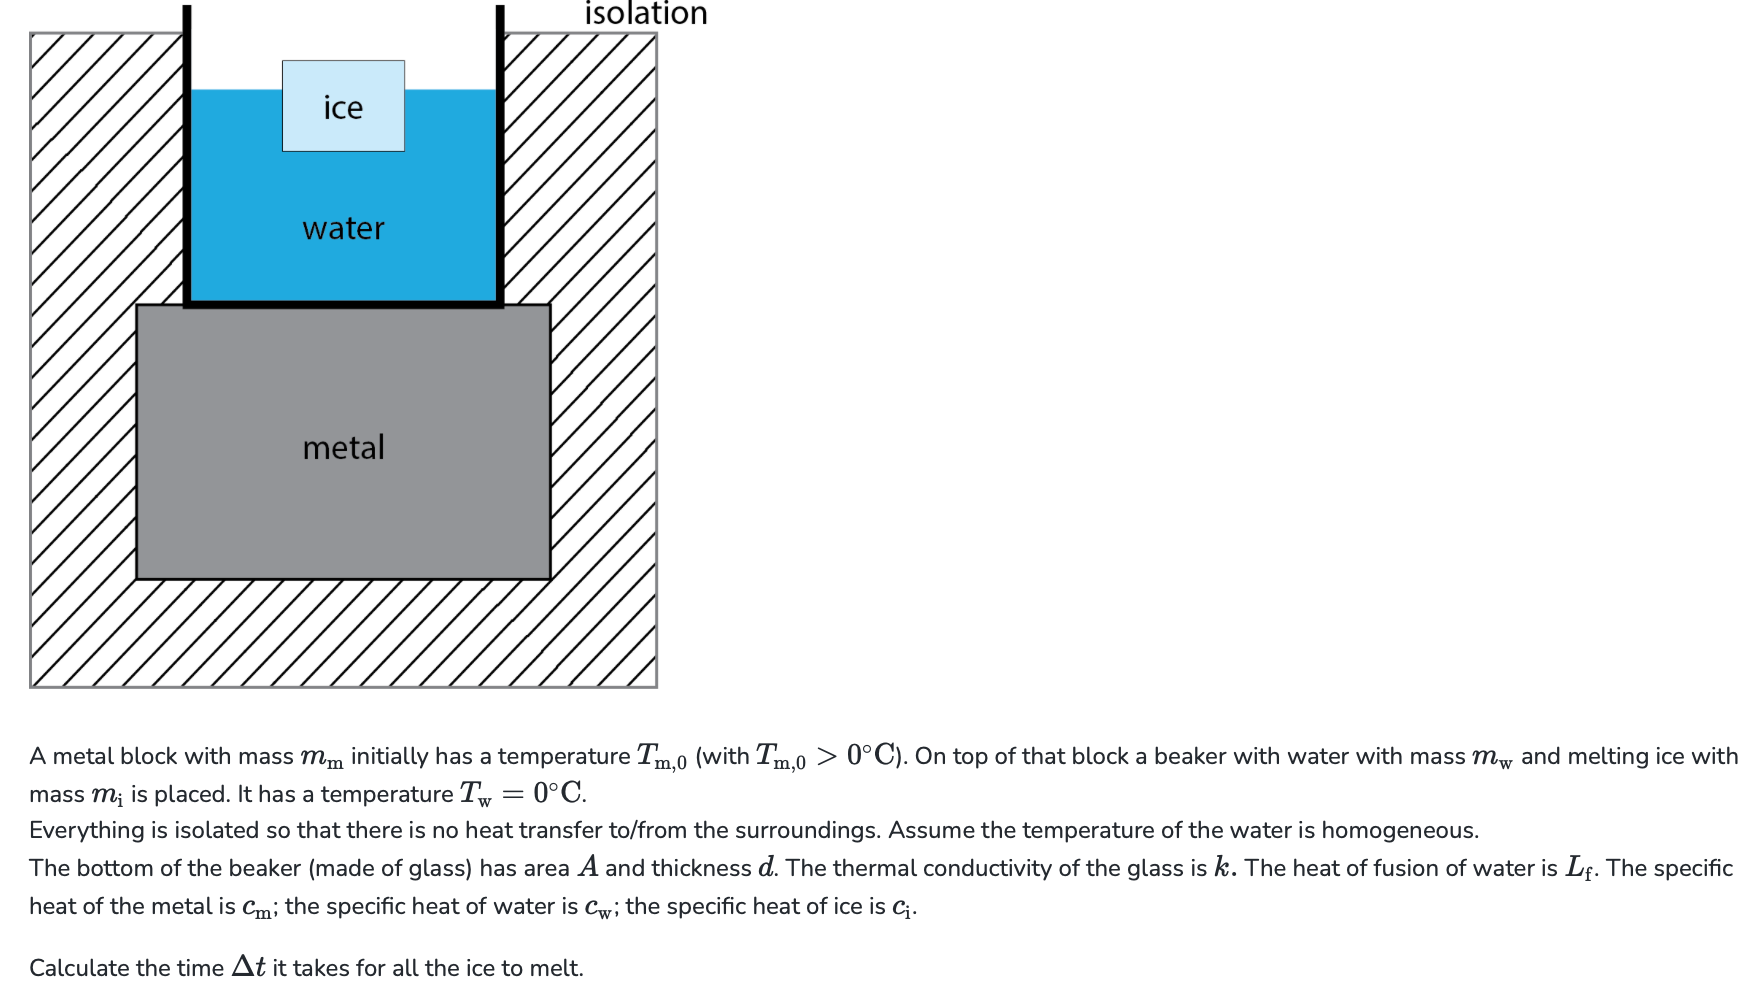 How to Calculate Time to Heat Water